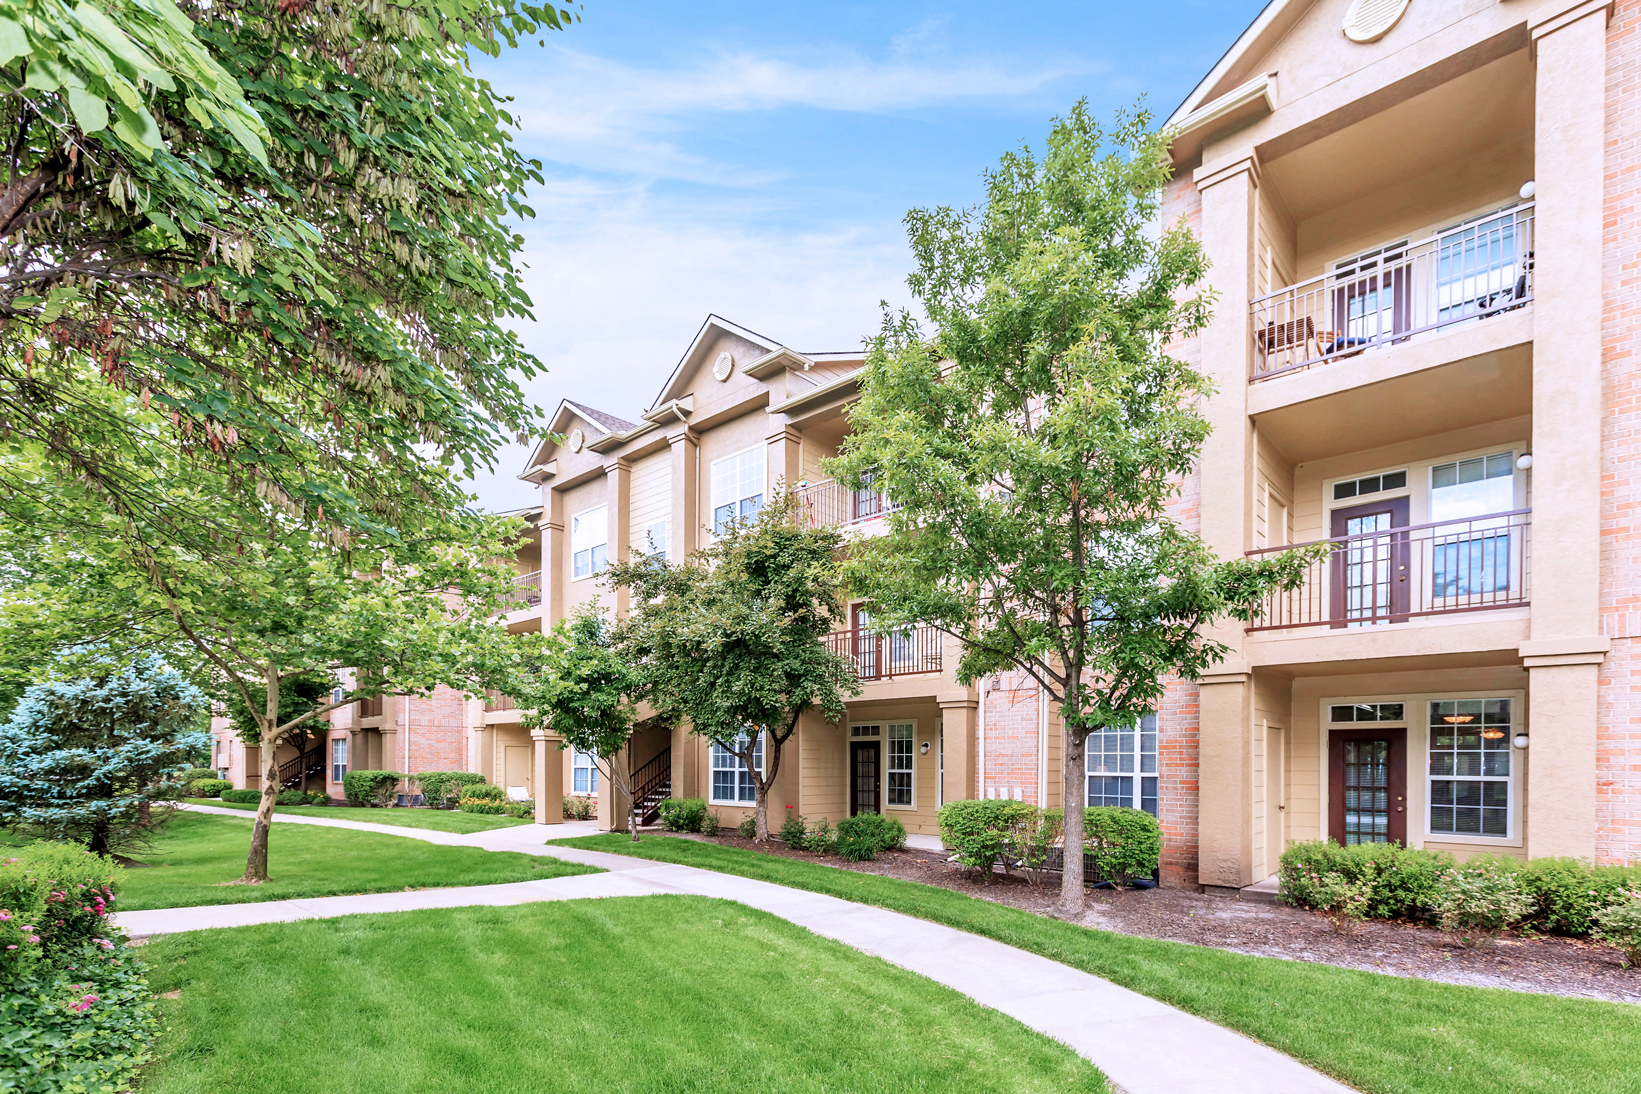 Exterior View at Crowne Chase Apartment Homes, Overland Park, KS